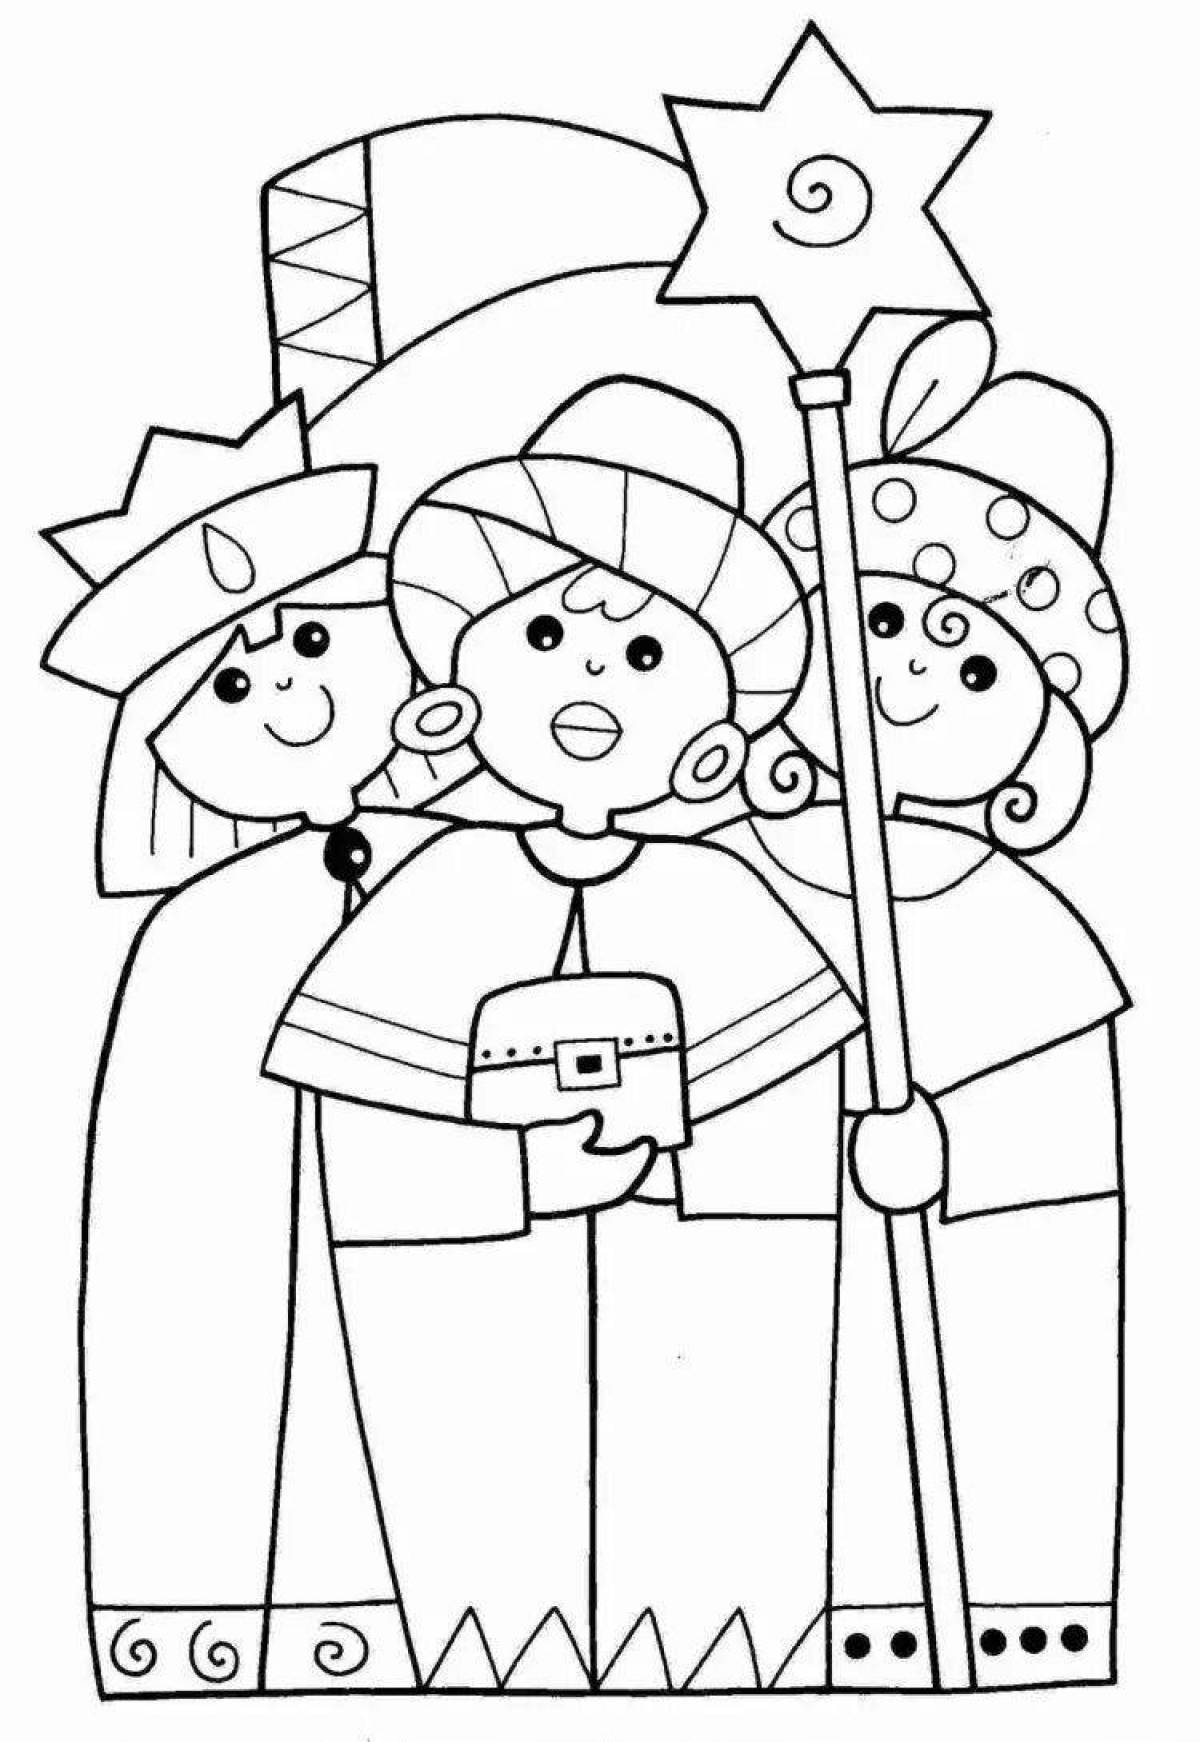 Christmas carols anniversary coloring book for children